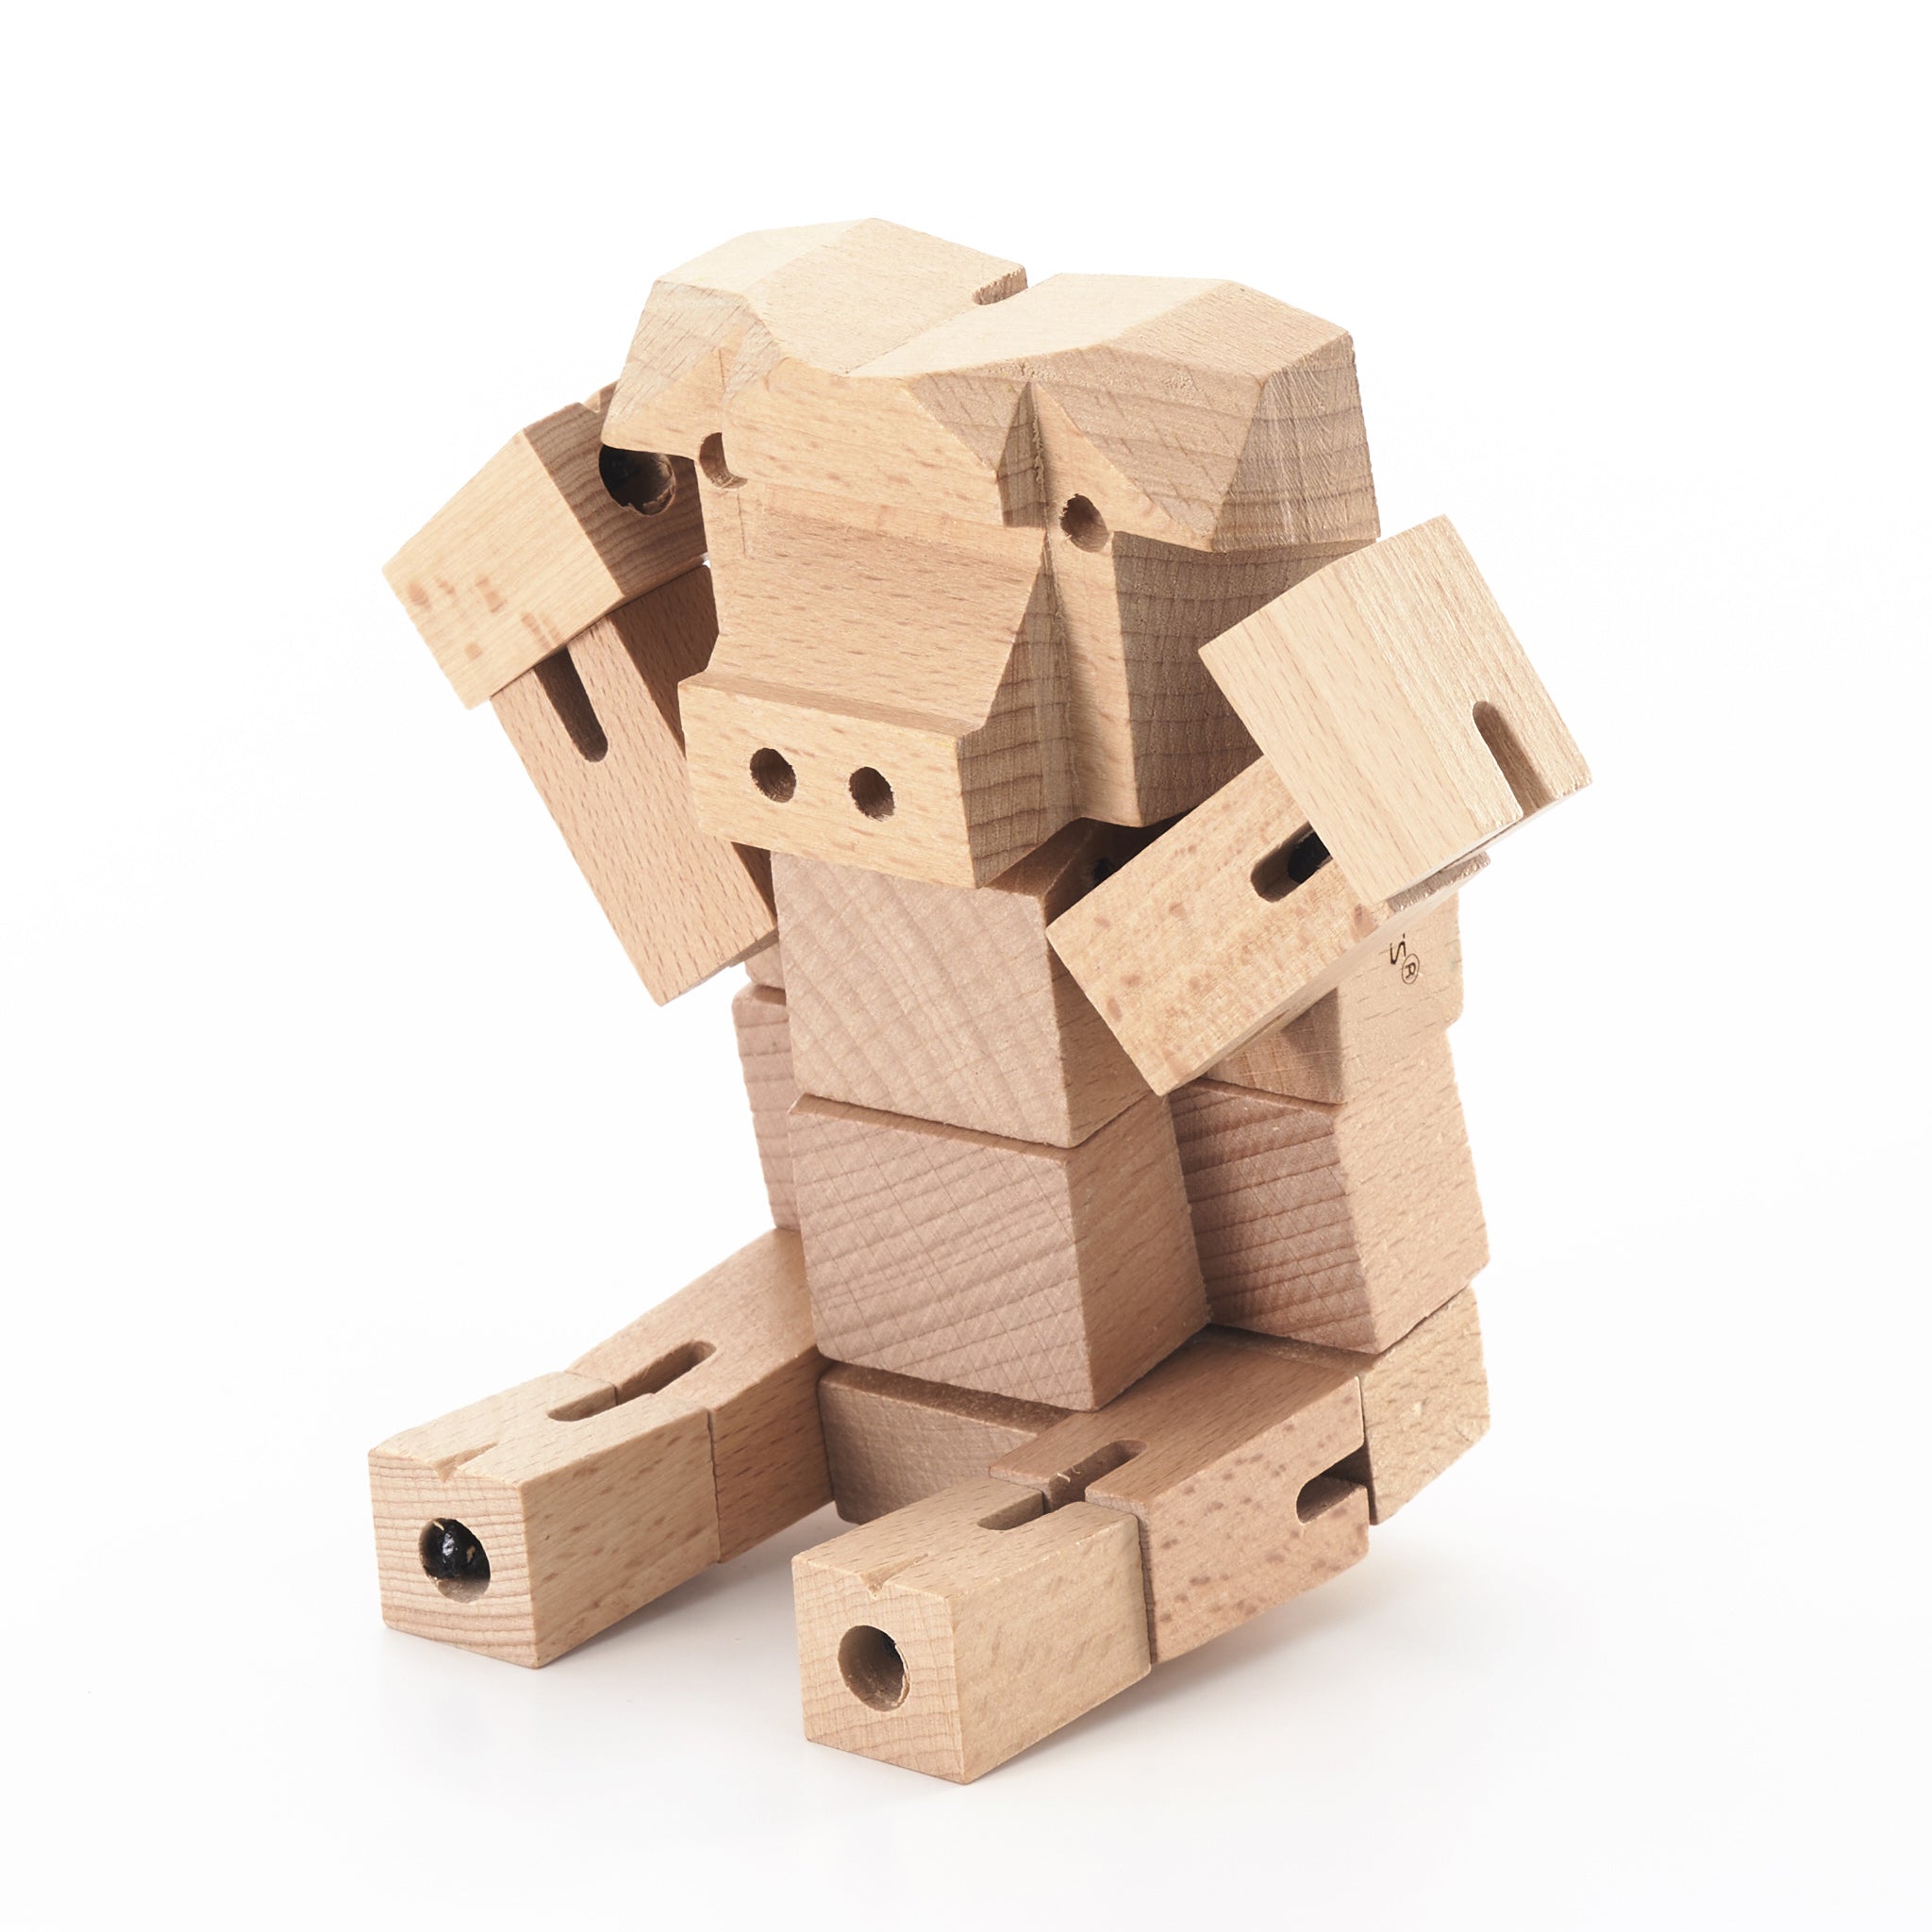 Morphits ® Pig Wooden Toy: Whimsical Wooden Playset Companions for Imaginative Minds - Yoshiaki Ito Design Sit N1